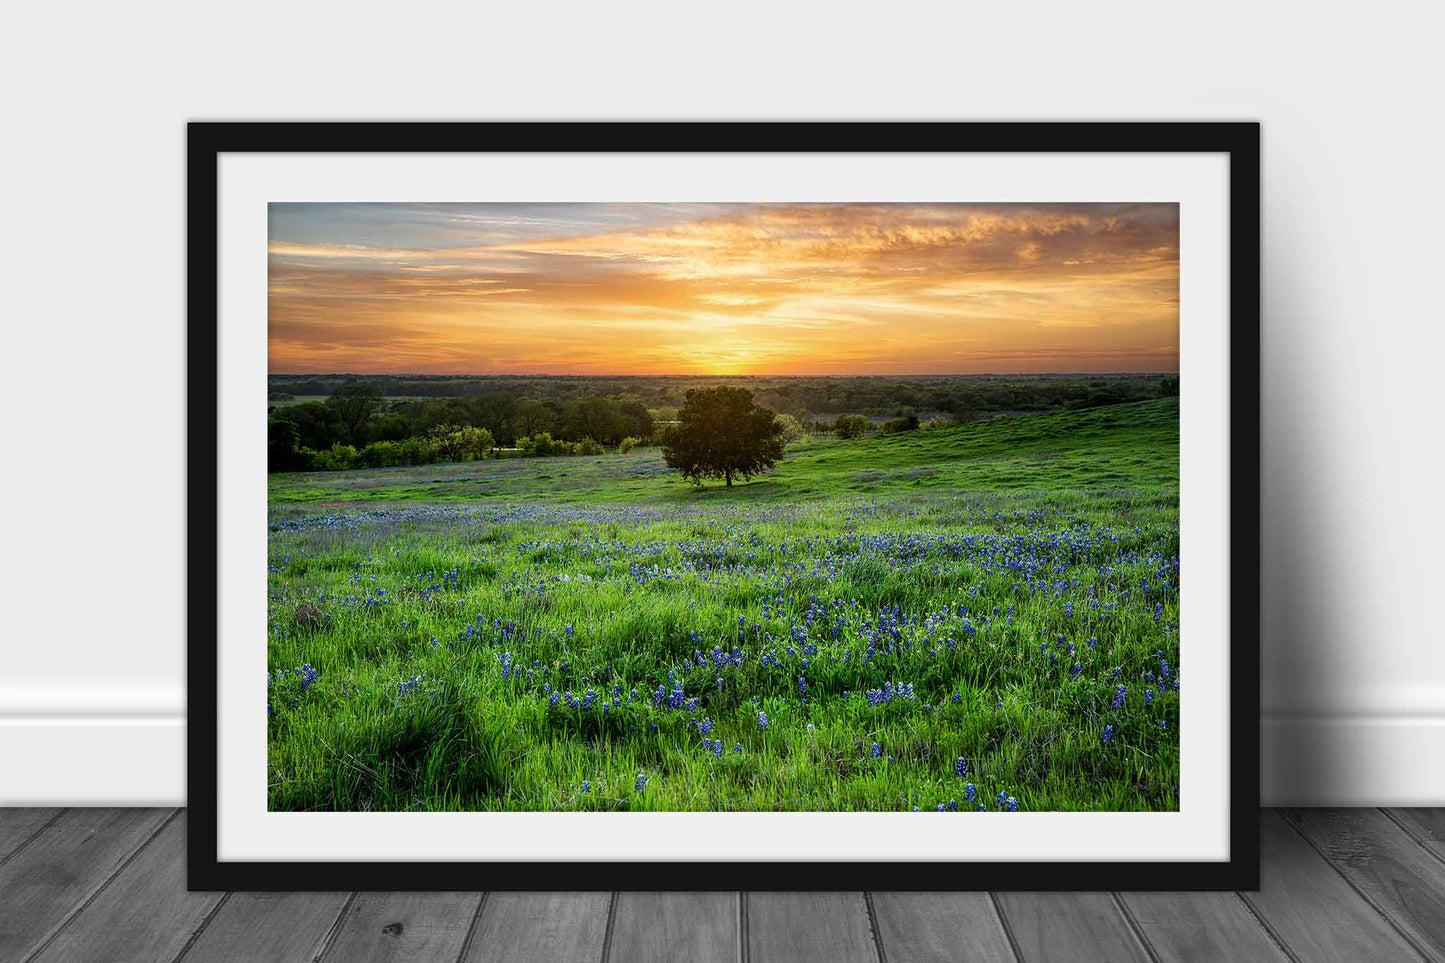 Framed and matted photography print of a lone tree in a field of bluebonnets at sunset on a spring evening in Texas by Sean Ramsey of Southern Plains Photography.